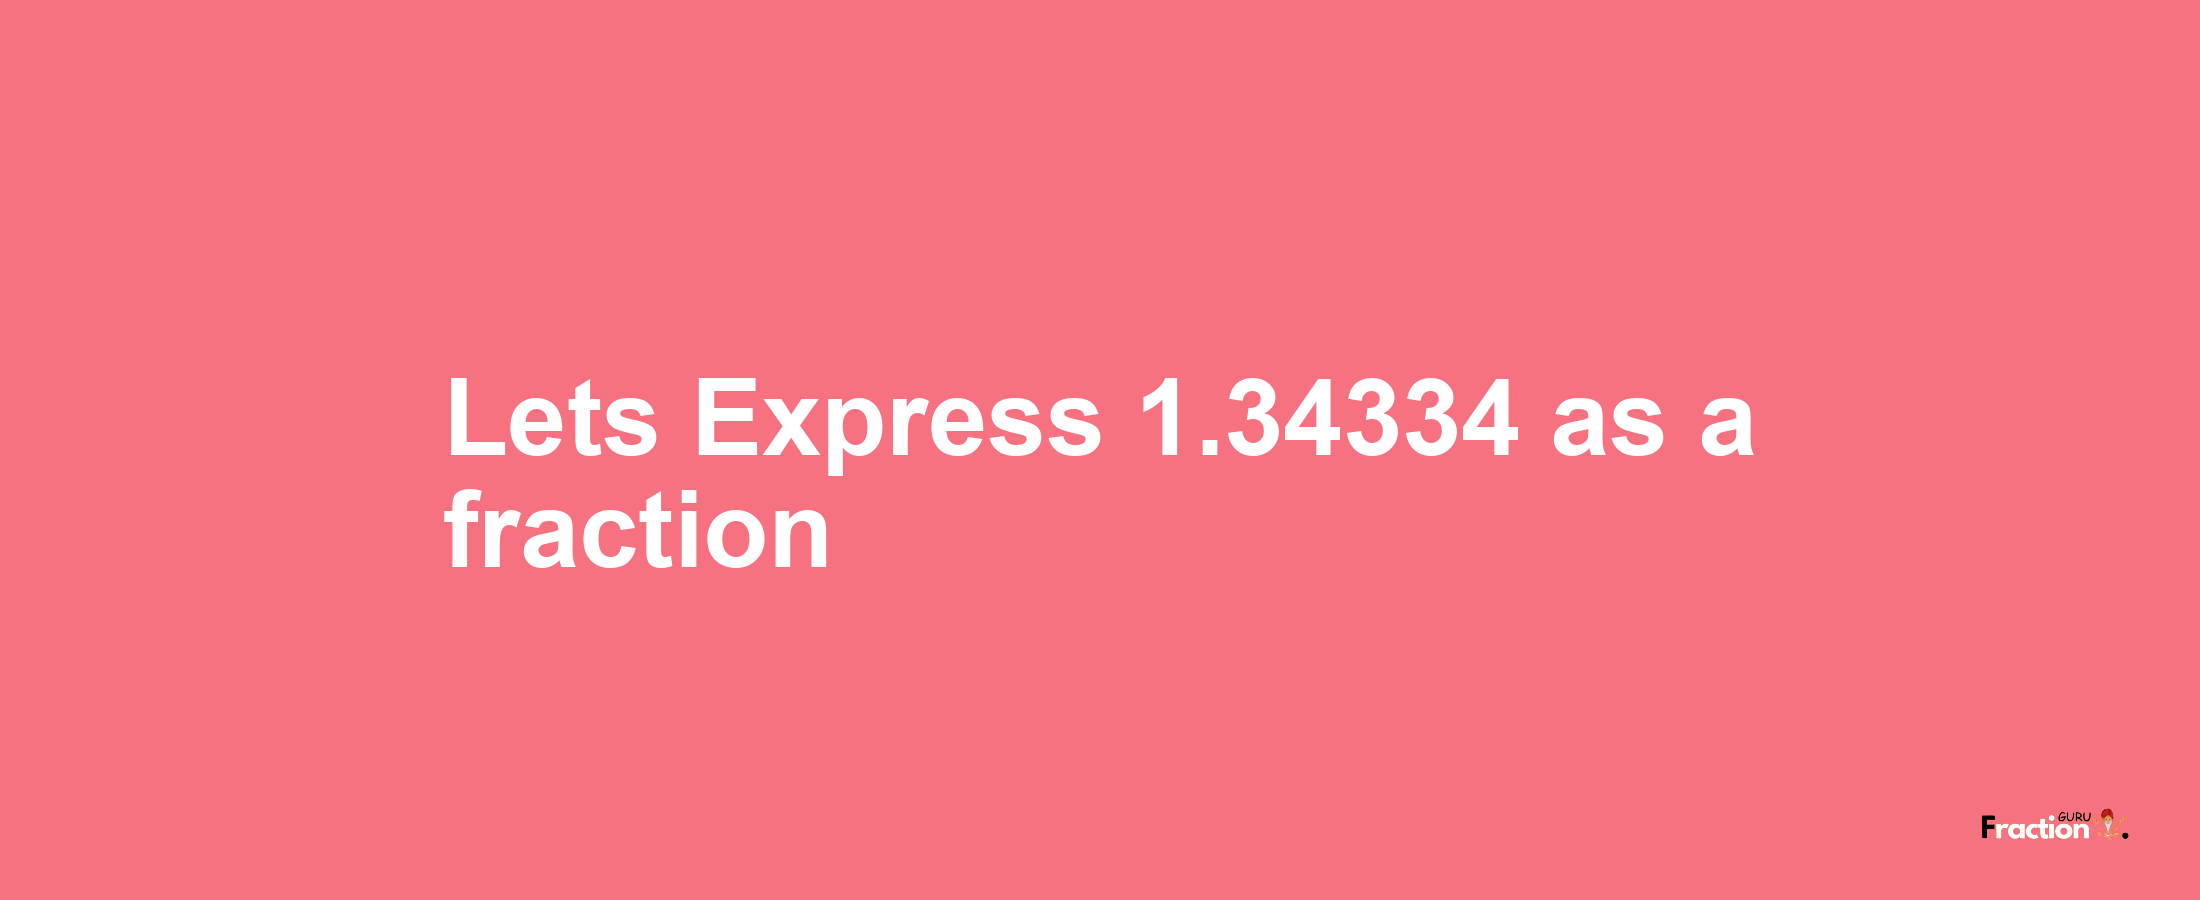 Lets Express 1.34334 as afraction